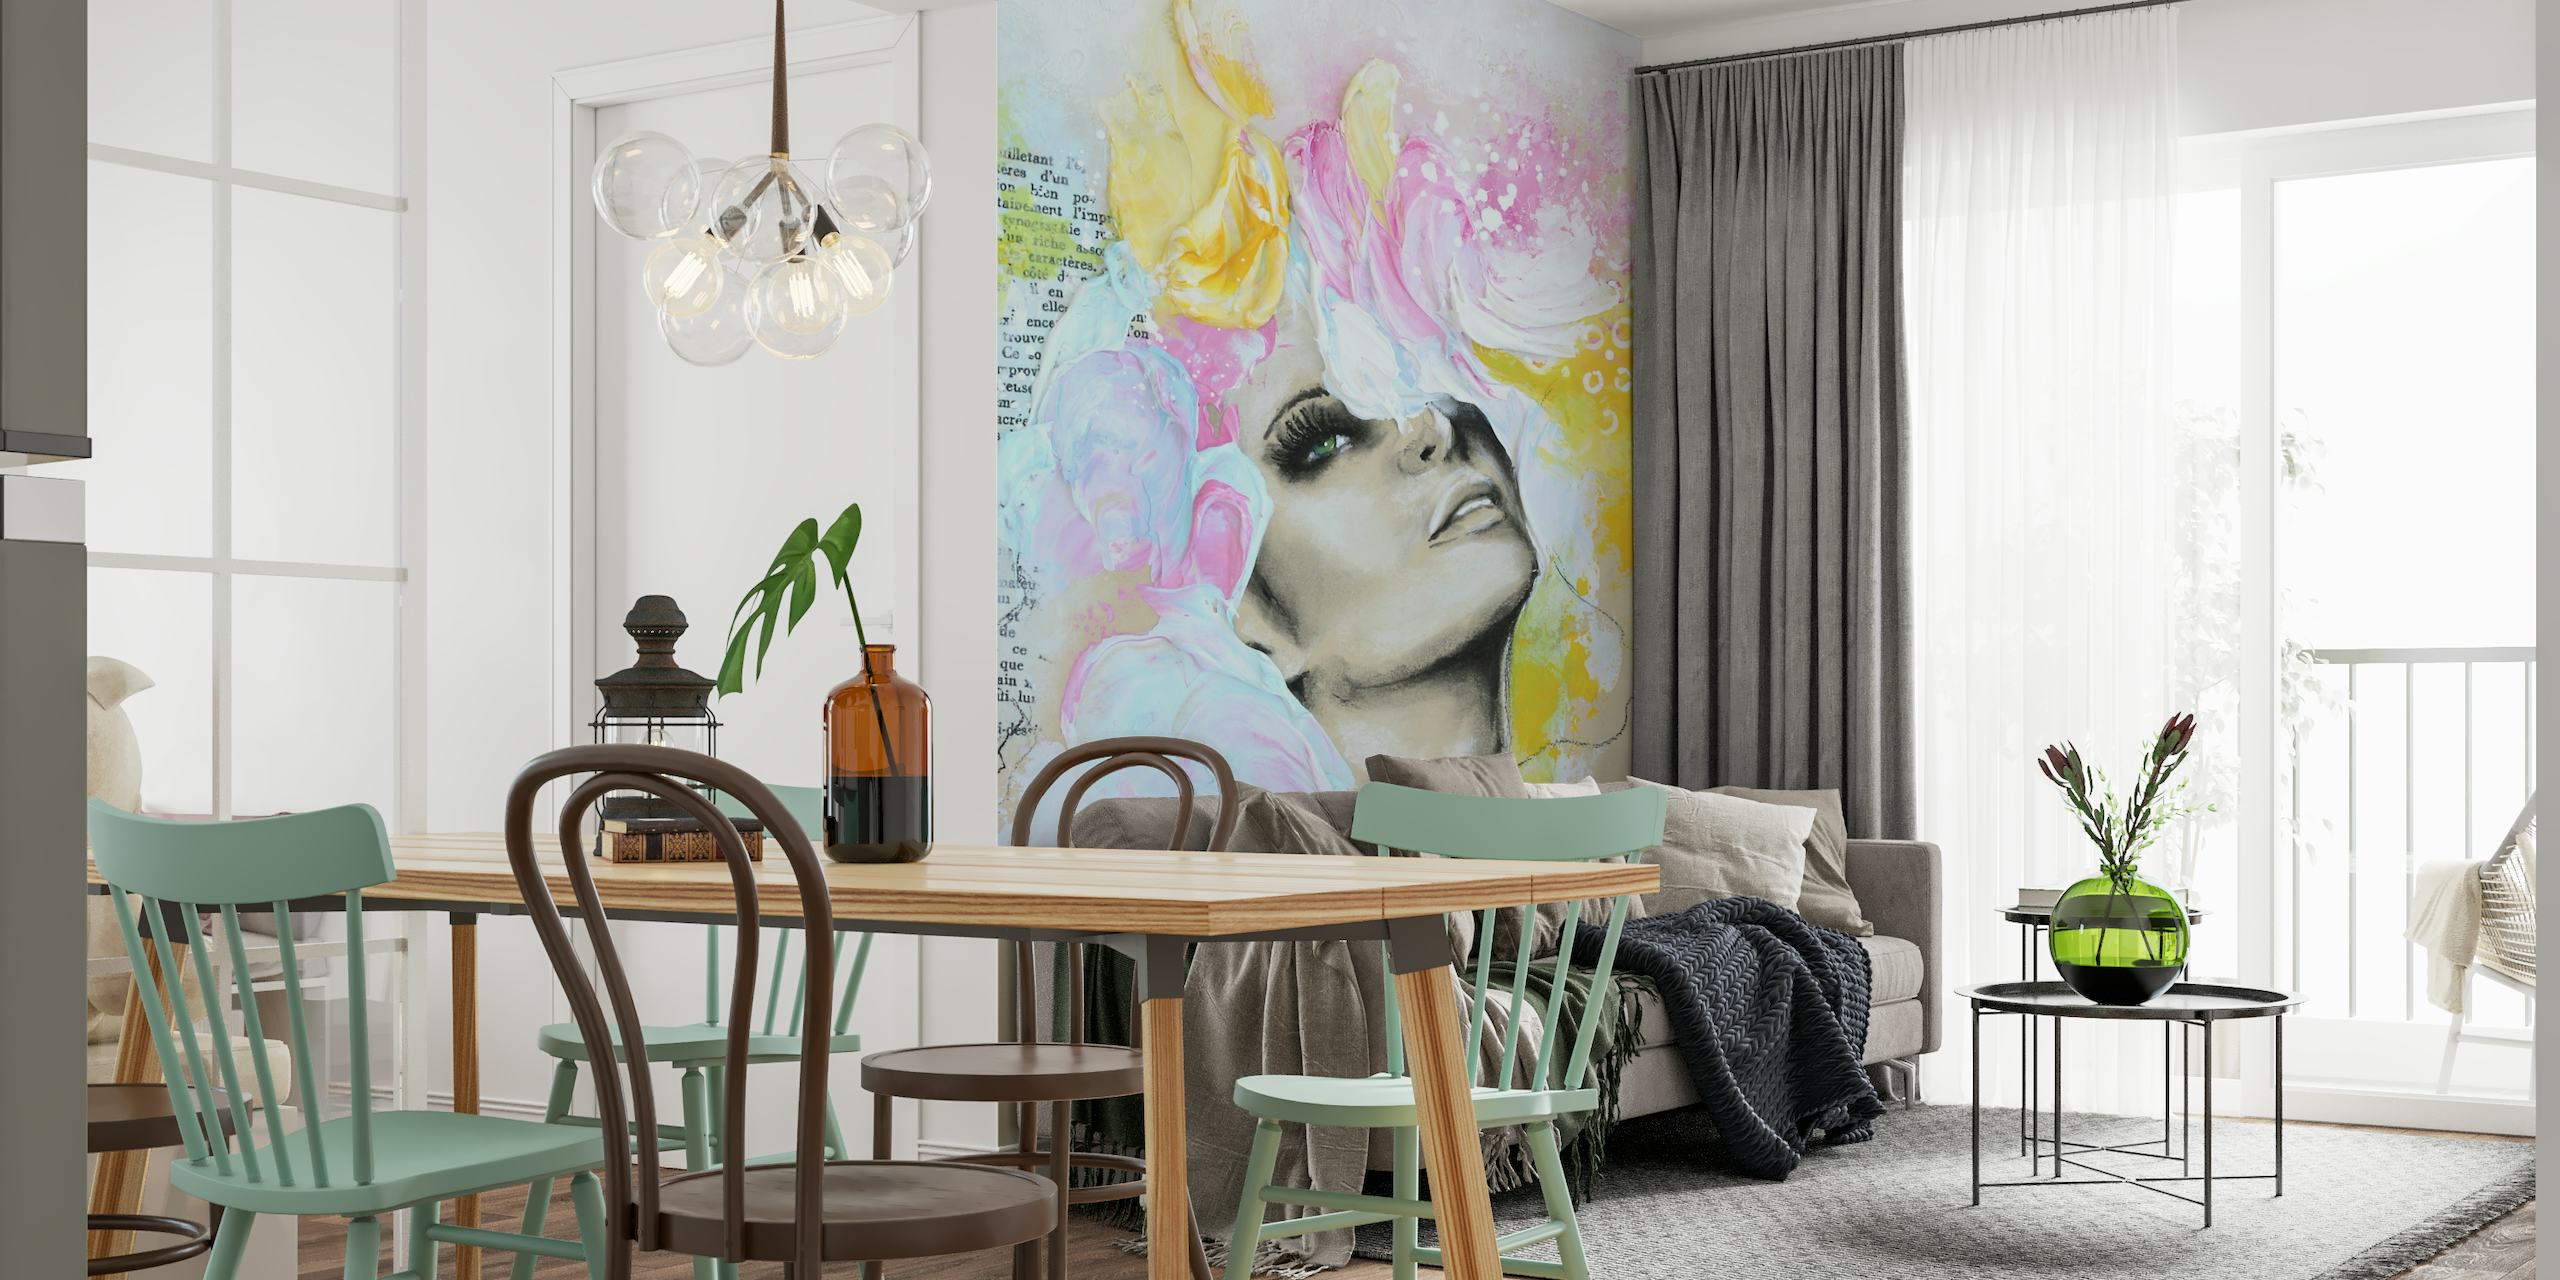 Artistic wall mural of a woman dreaming with a pastel summer palette and floral accents